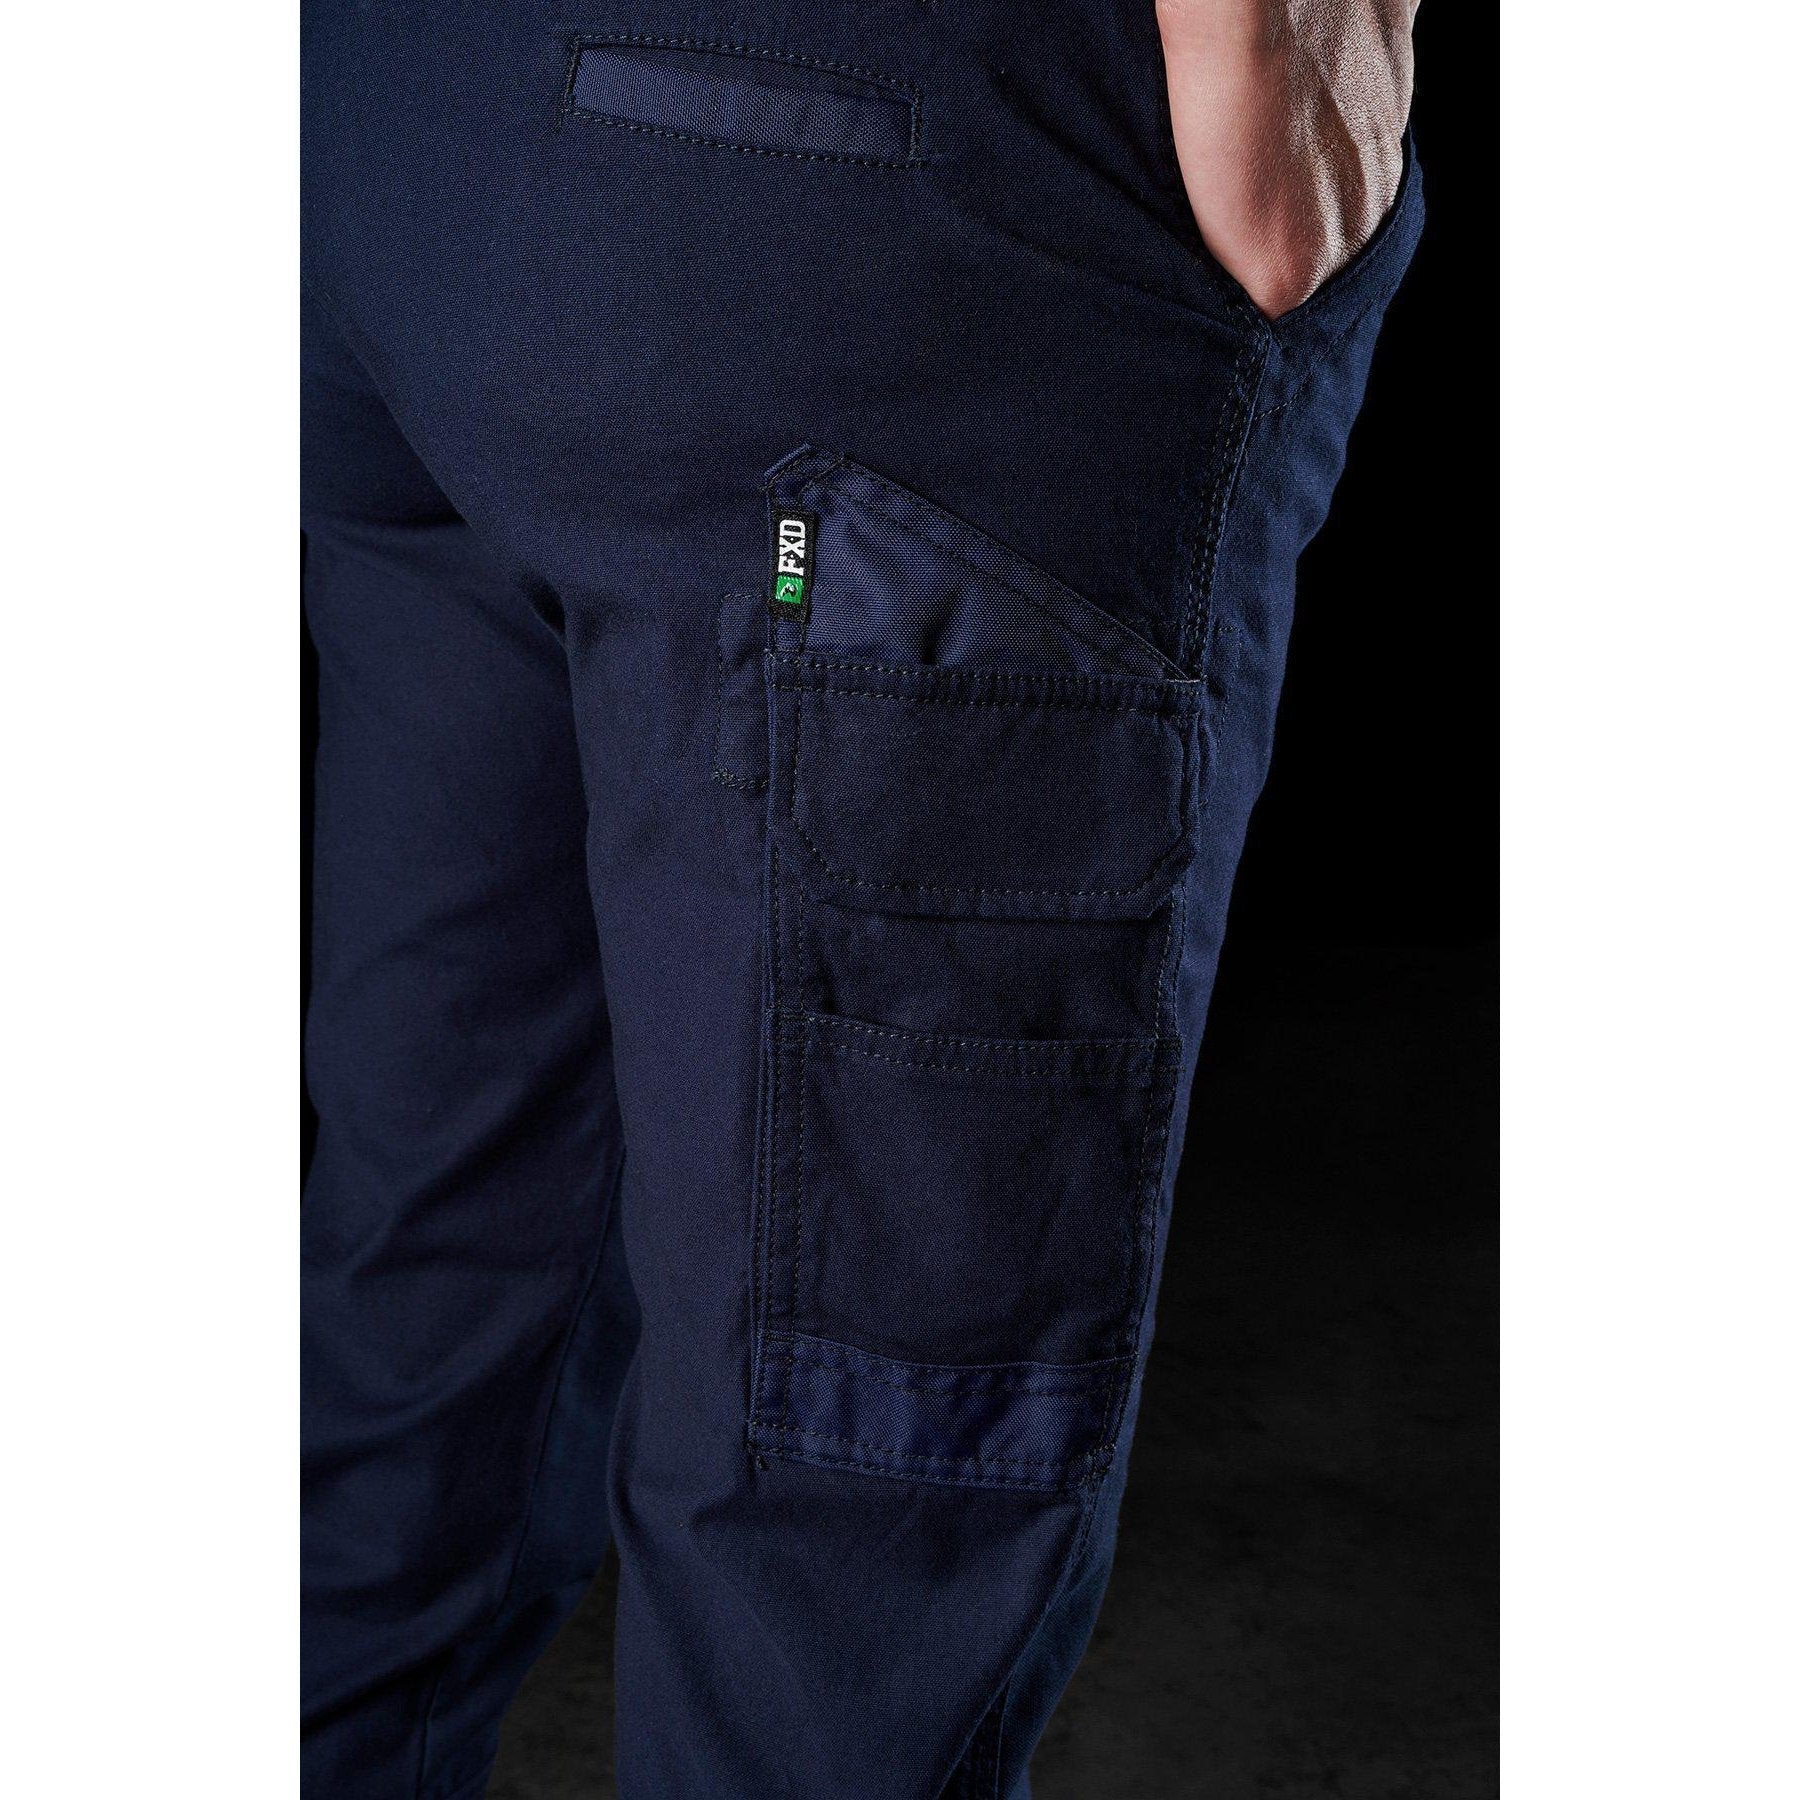 FXD Womens Stretched Cuffed Work Pants - WP-4W | Womens Workwear